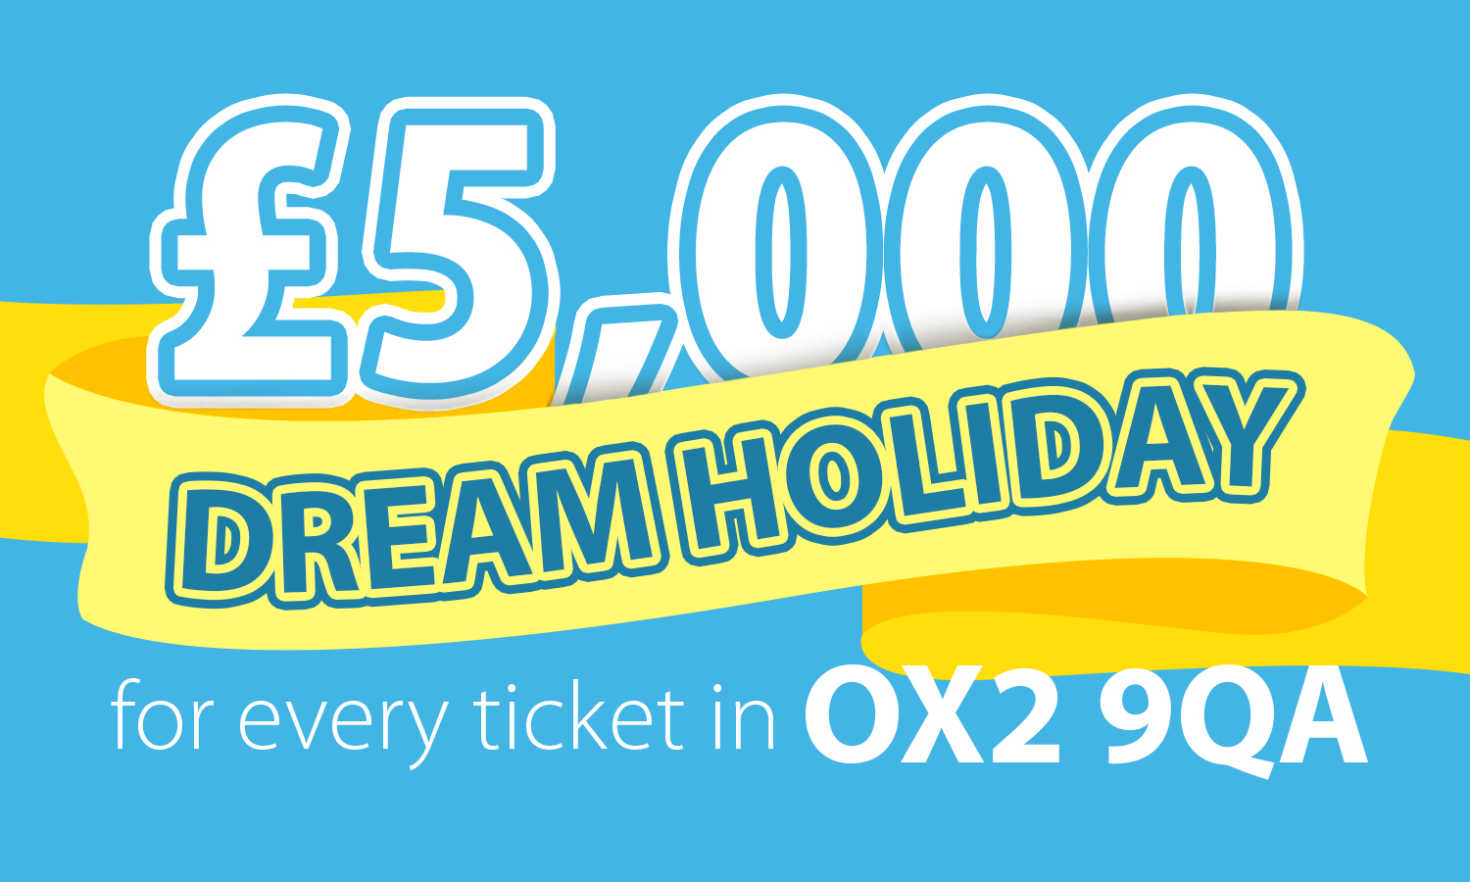 One lucky player in Cumnor has won this month's Dream Holiday prize